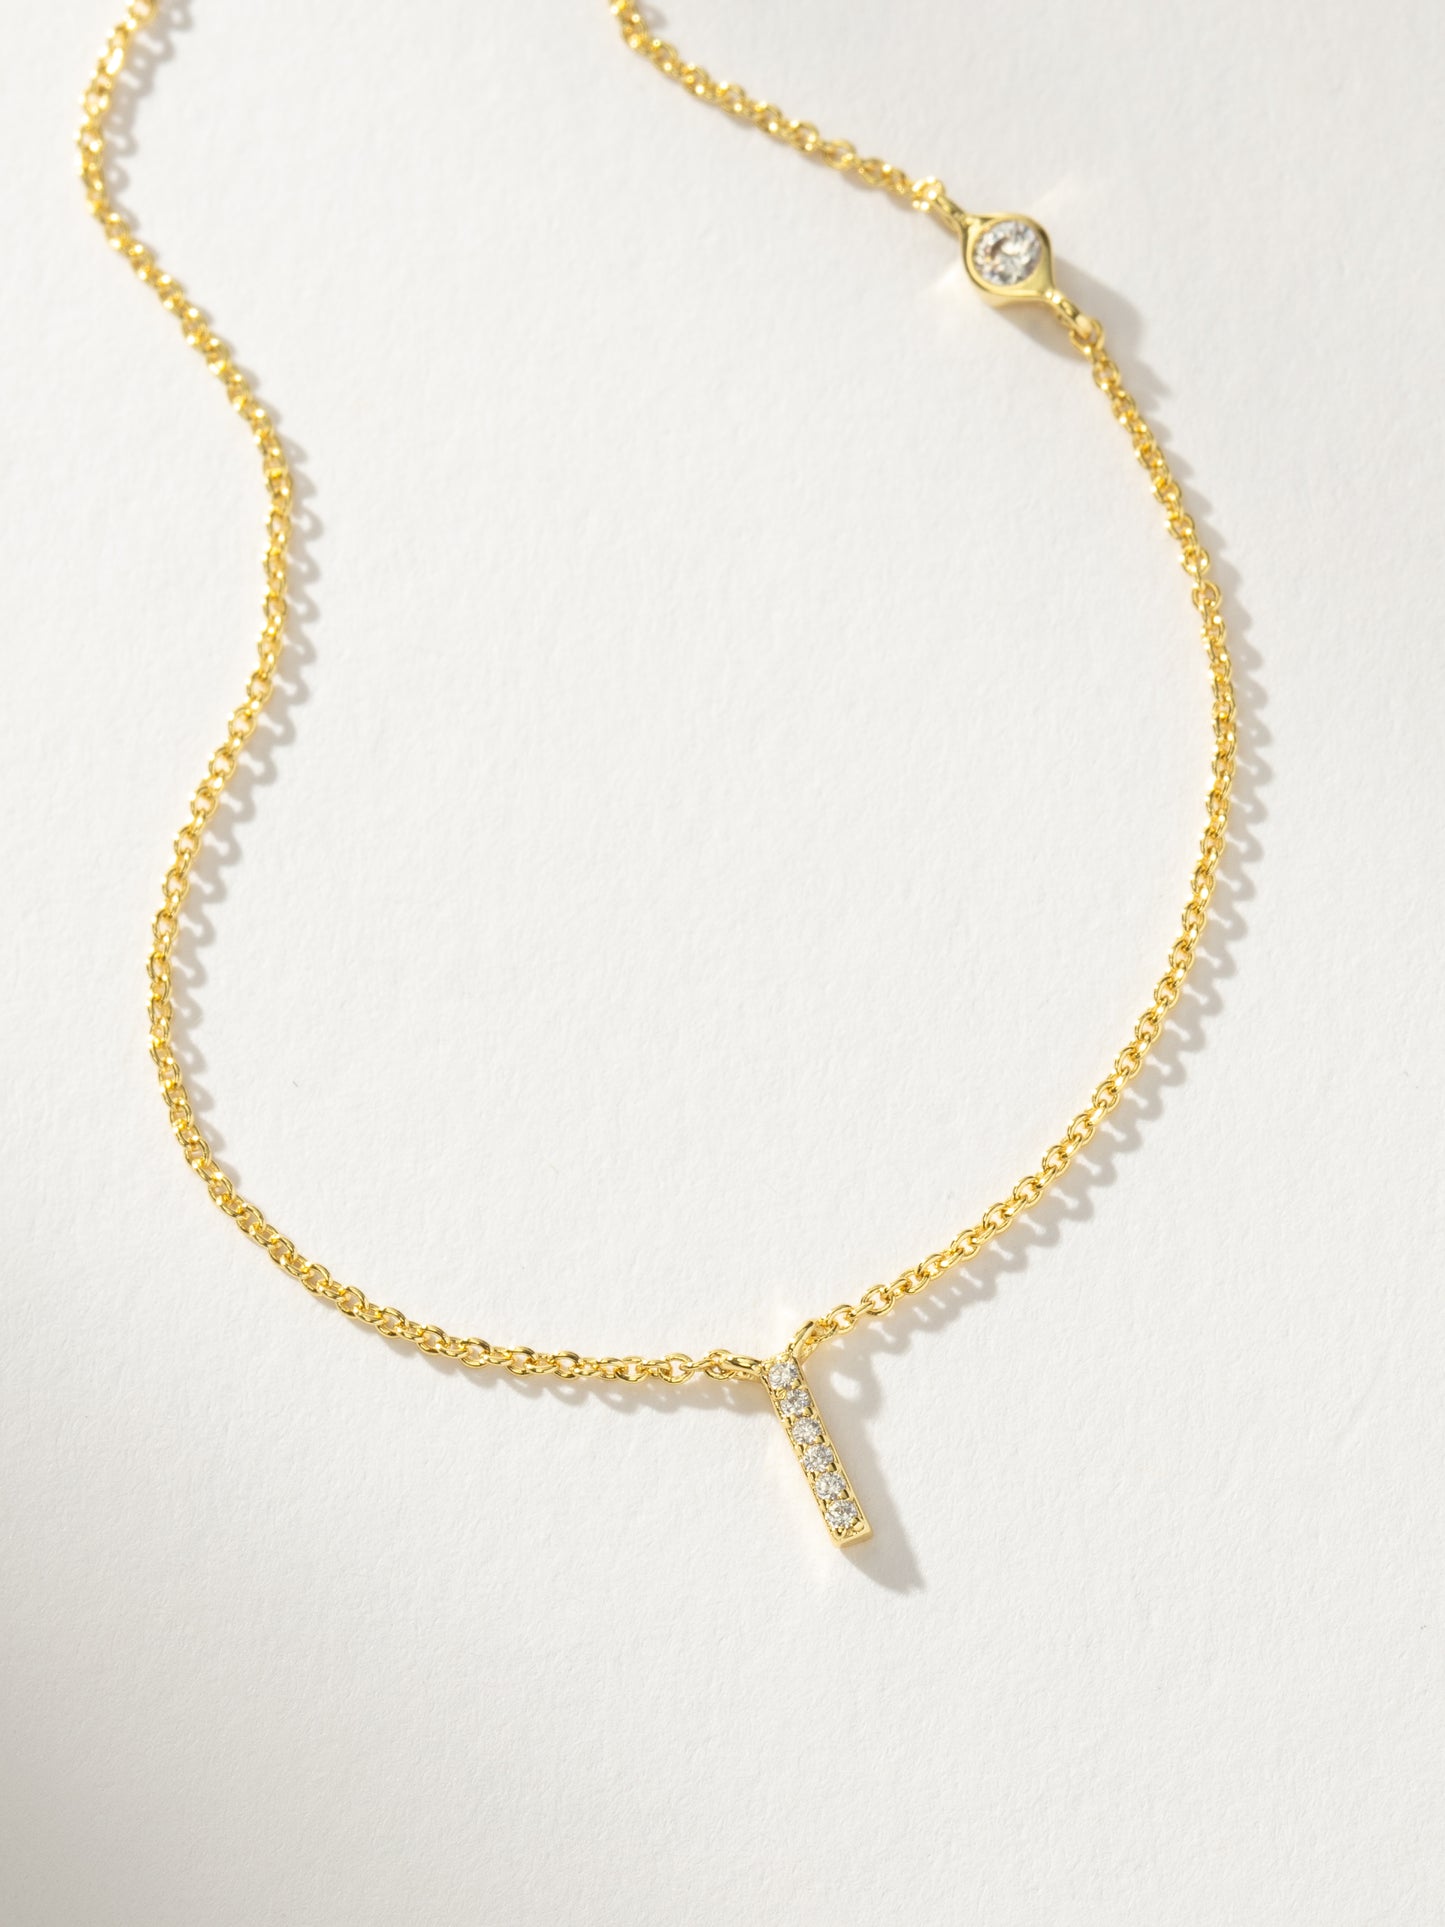 Pavé Initial Necklace | Gold I | Product Detail Image | Uncommon James